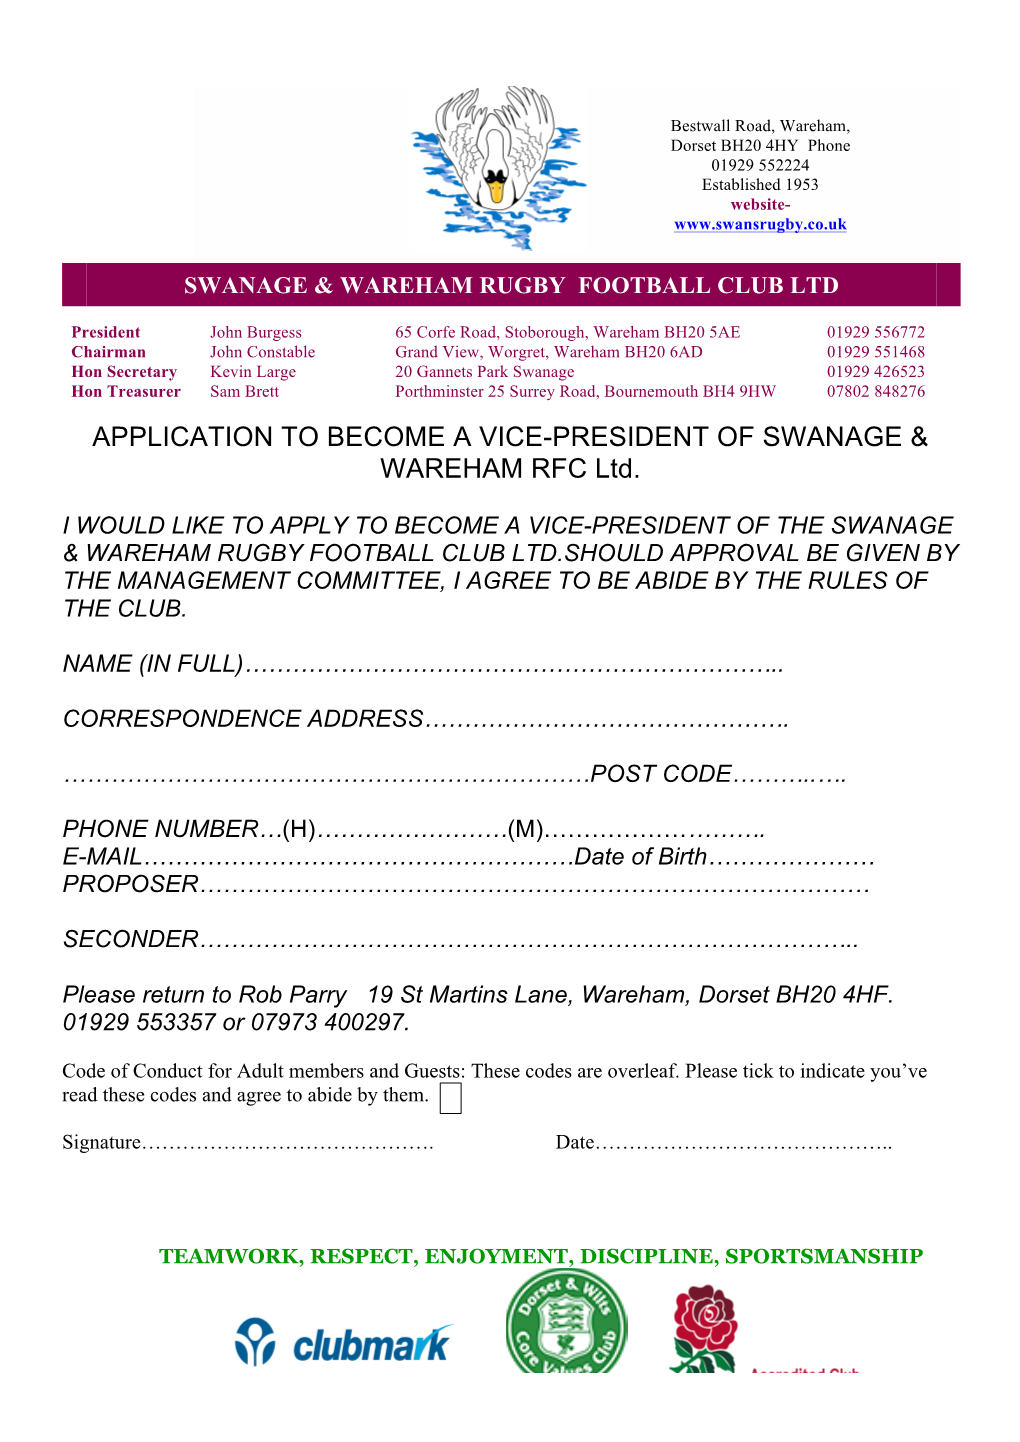 APPLICATION to BECOME a VICE-PRESIDENT of SWANAGE & WAREHAM RFC Ltd